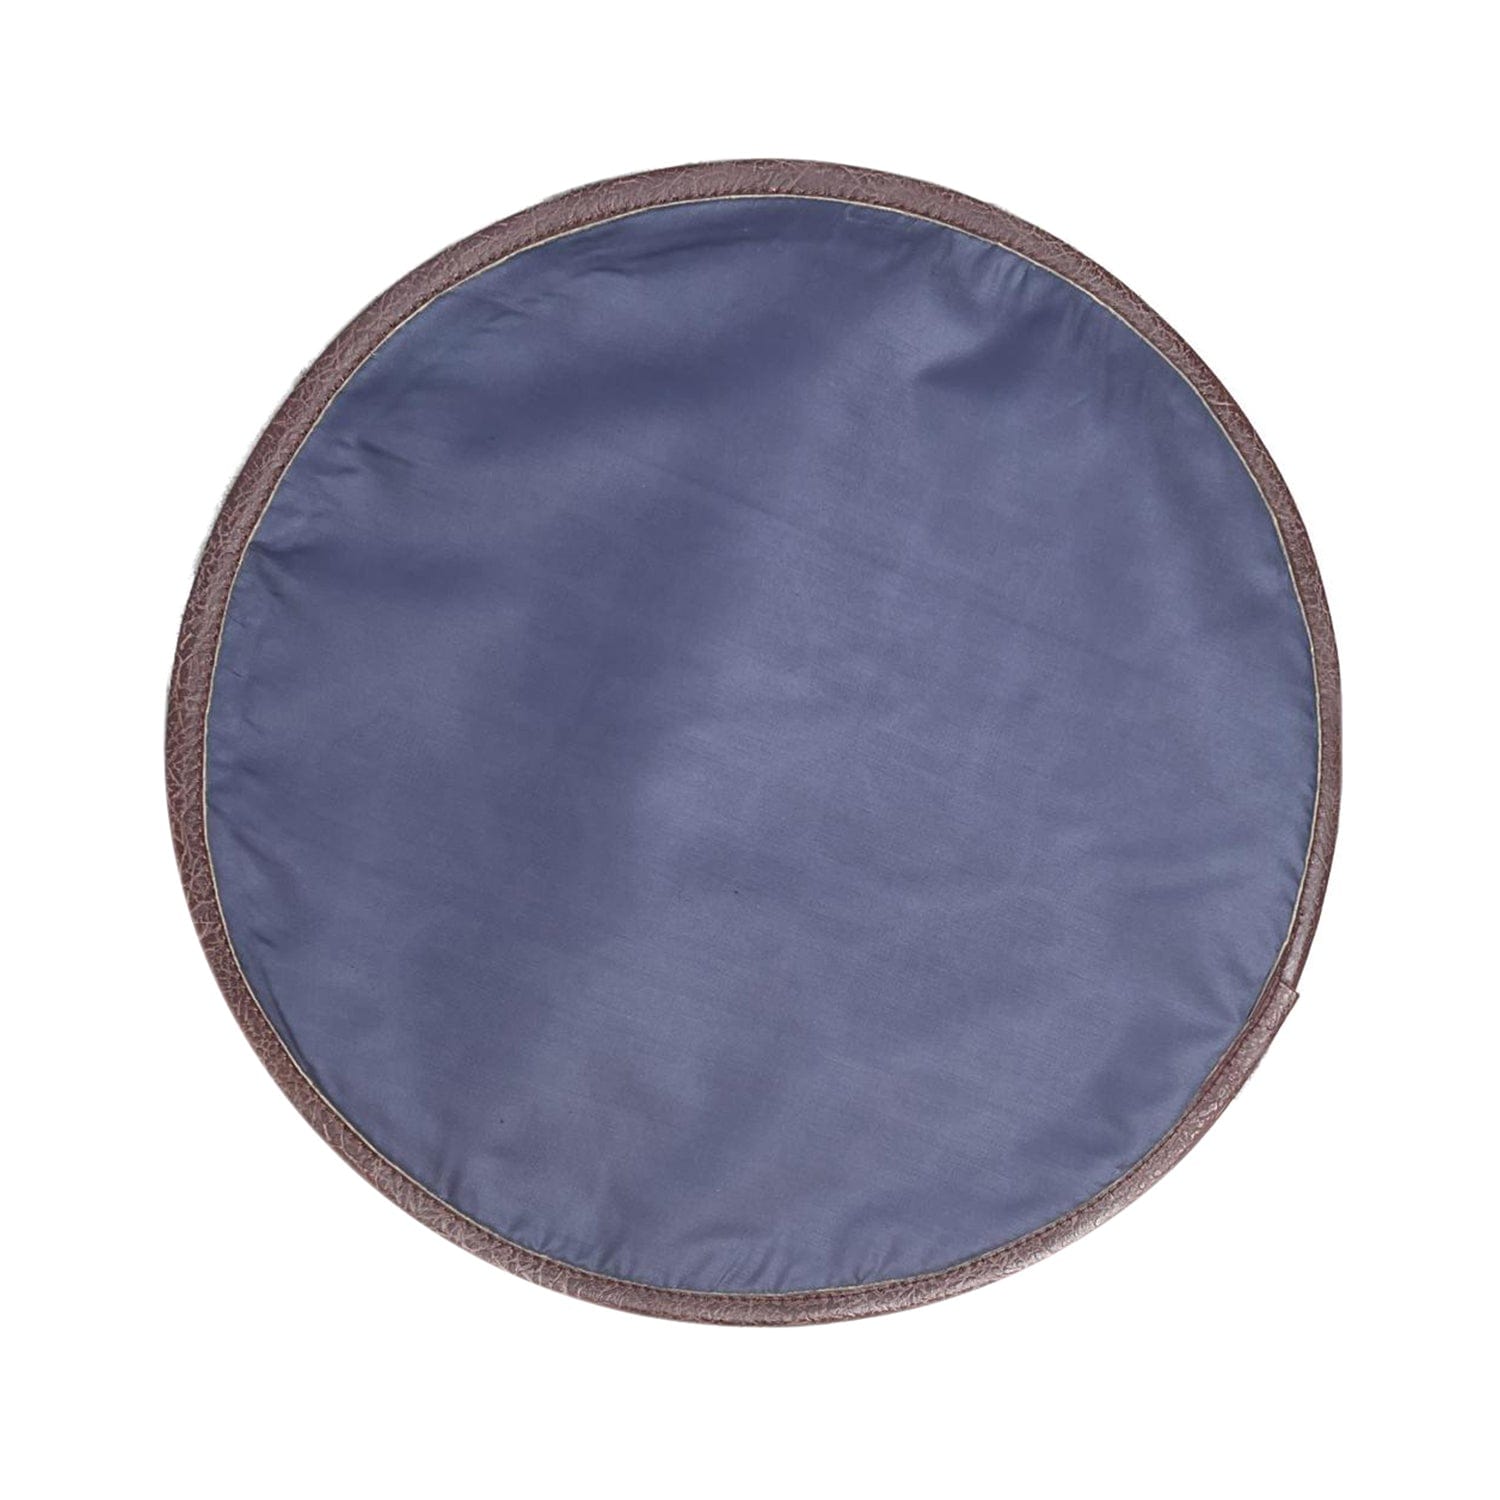 Mona-B Placemat Mona B Set of 2 Printed Placemats, 13 INCH Round, Best for Bed-Side Table/Center Table, Dining Table/Shelves - PP-115